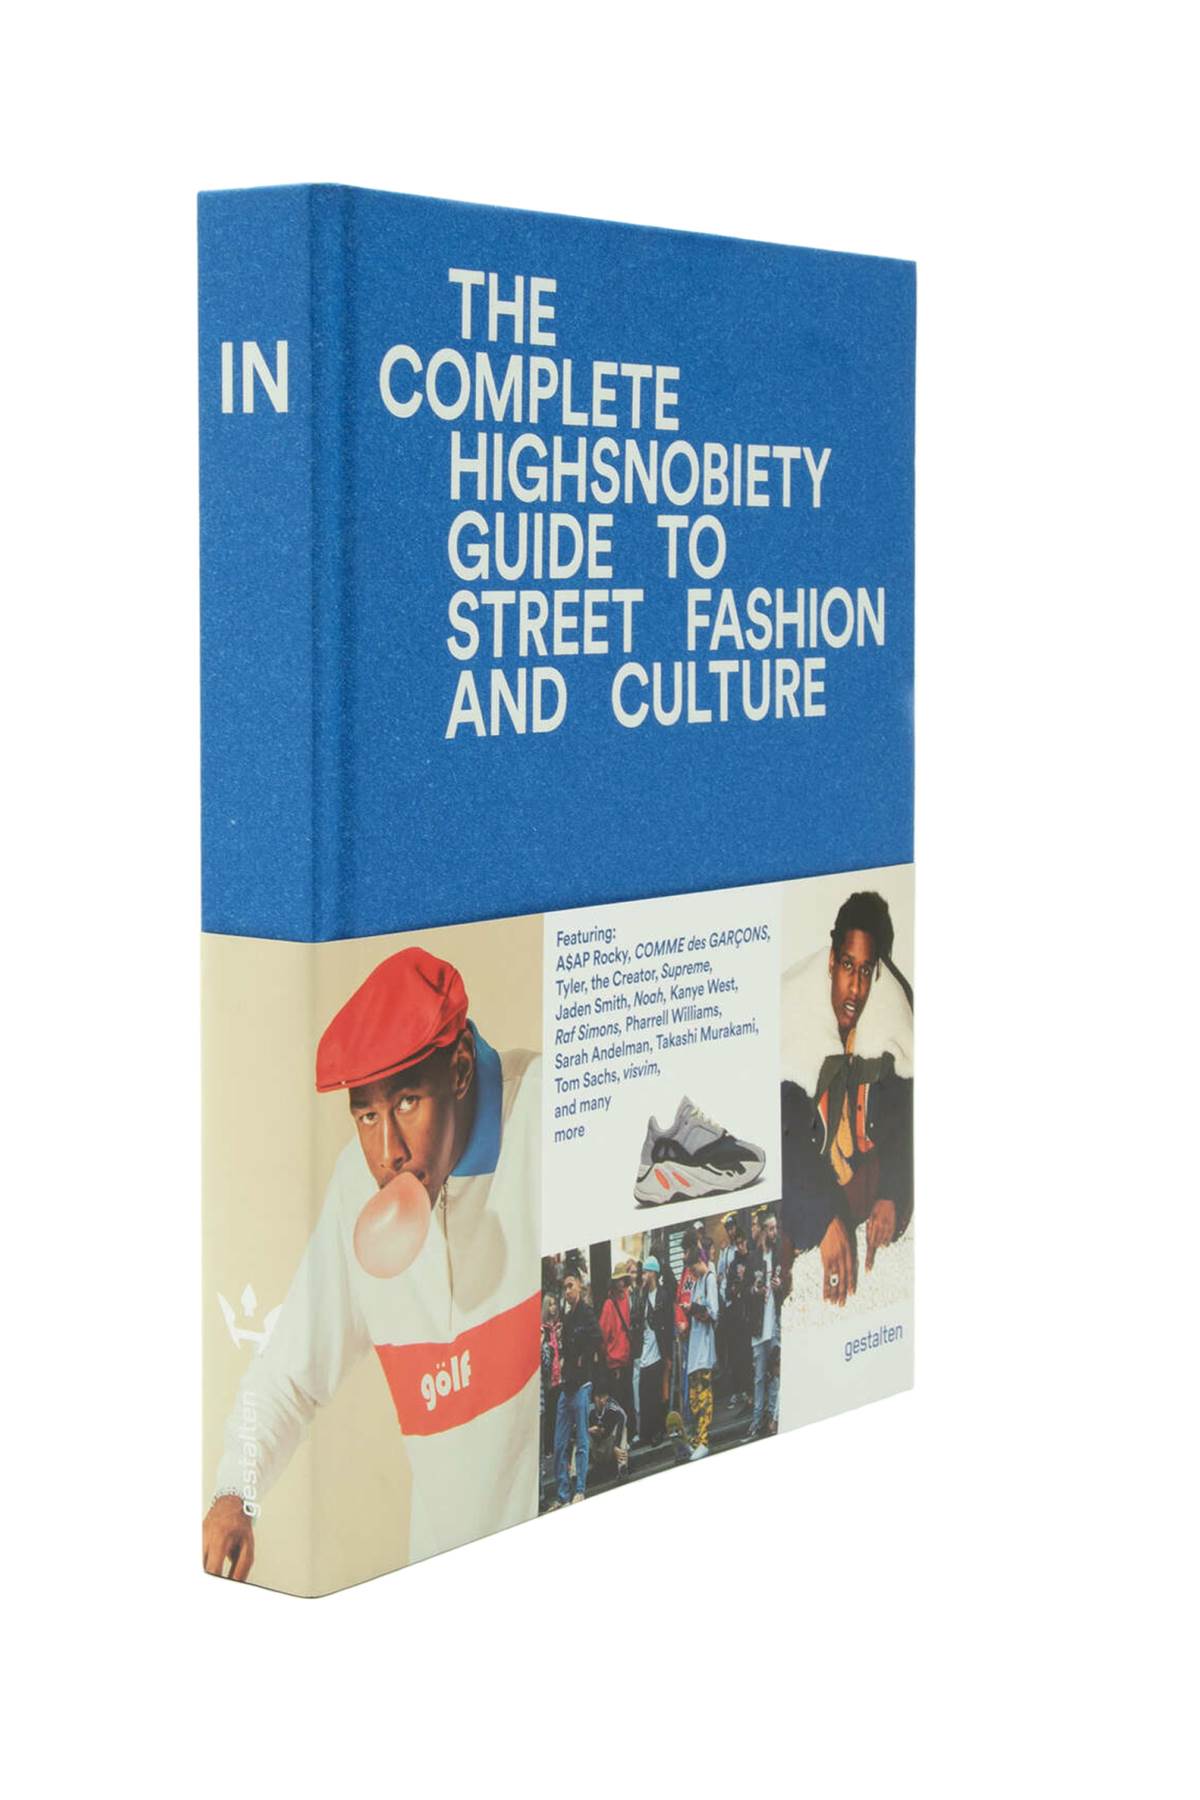 New mags the incomplete – highsnobiety guide to street fashion and culture-1